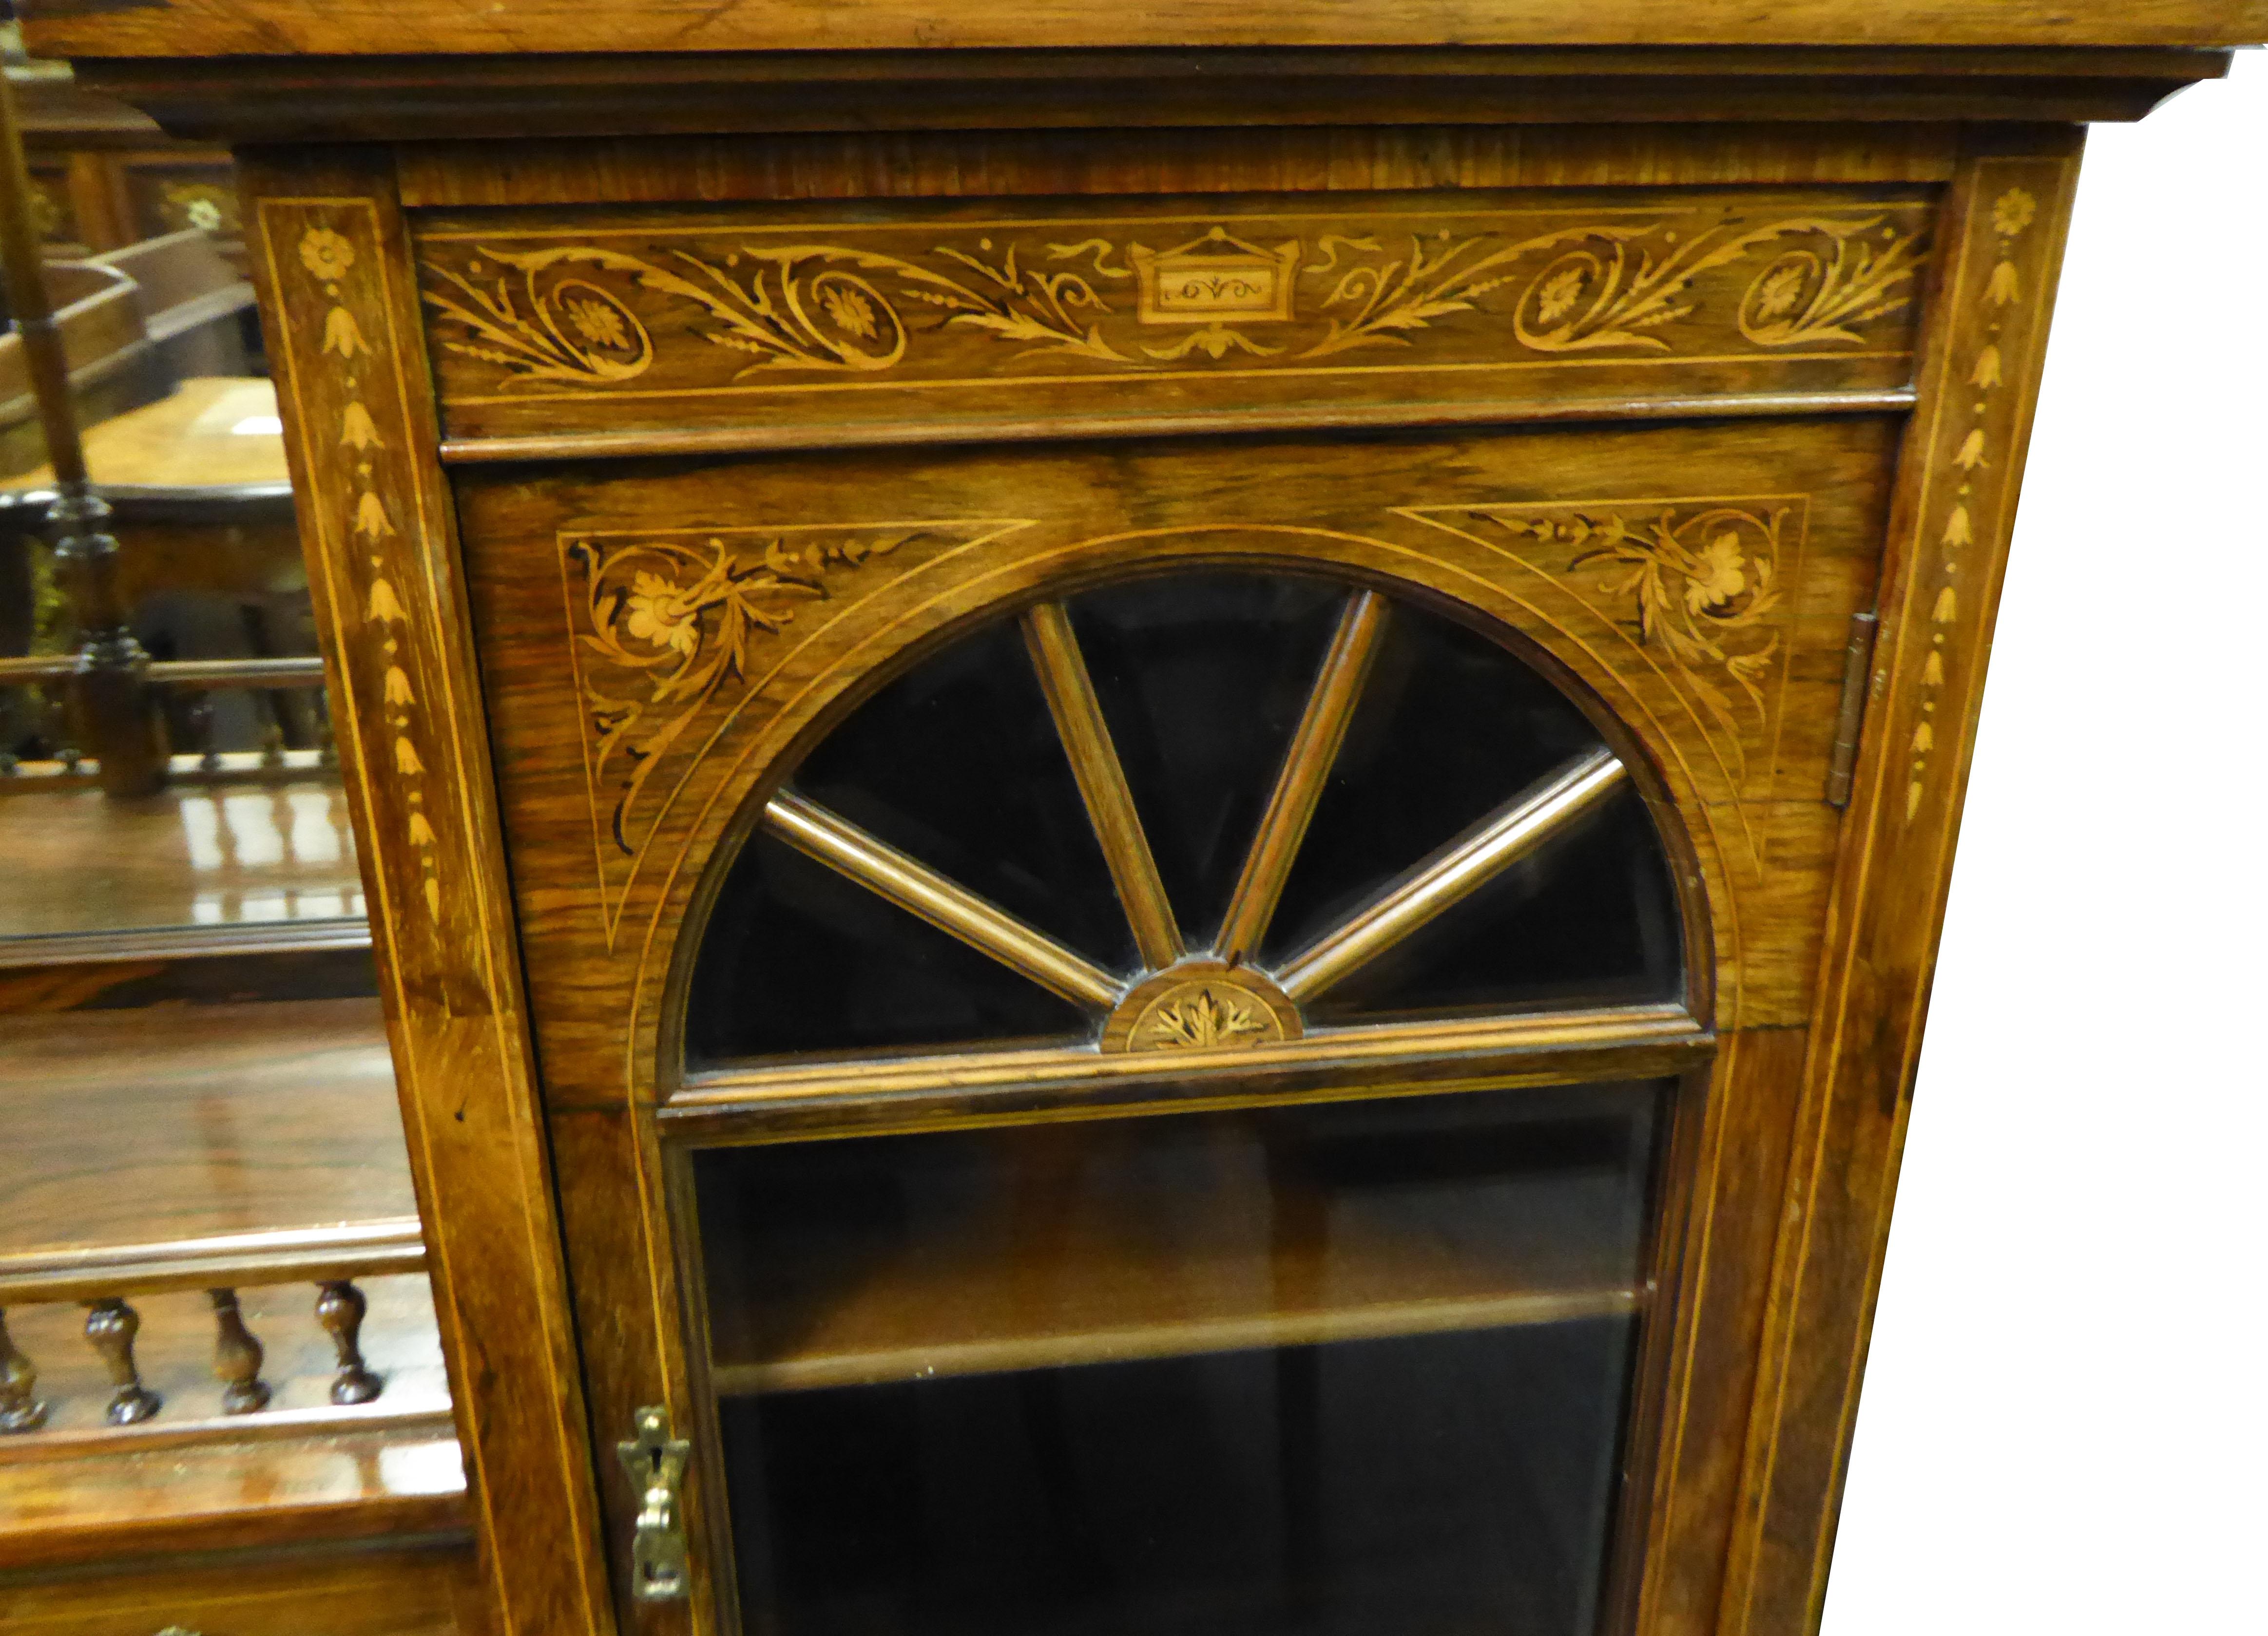 For sale is a very good quality Edwardian rosewood and inlaid cabinet. The top of the cabinet has three beveled mirrors, with two cabinet sections, one on each side, both with glazed doors opening to reveal ample storage space. The center of the